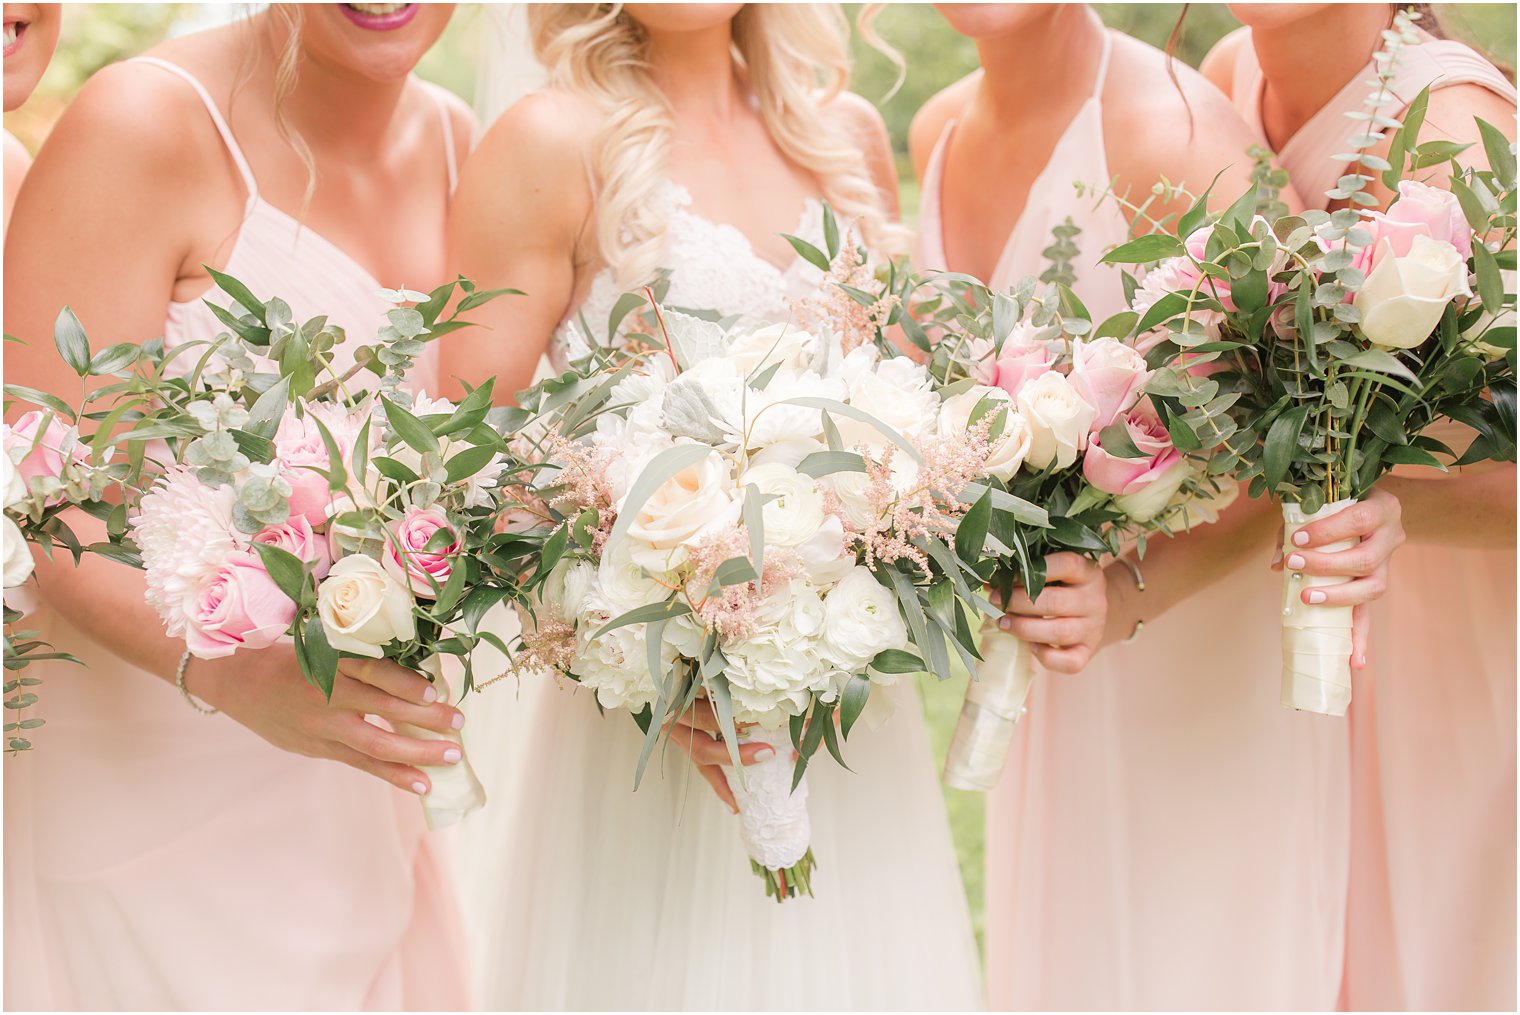 Bridesmaids bouquets by Dalsimer Spitz and Peck Florist